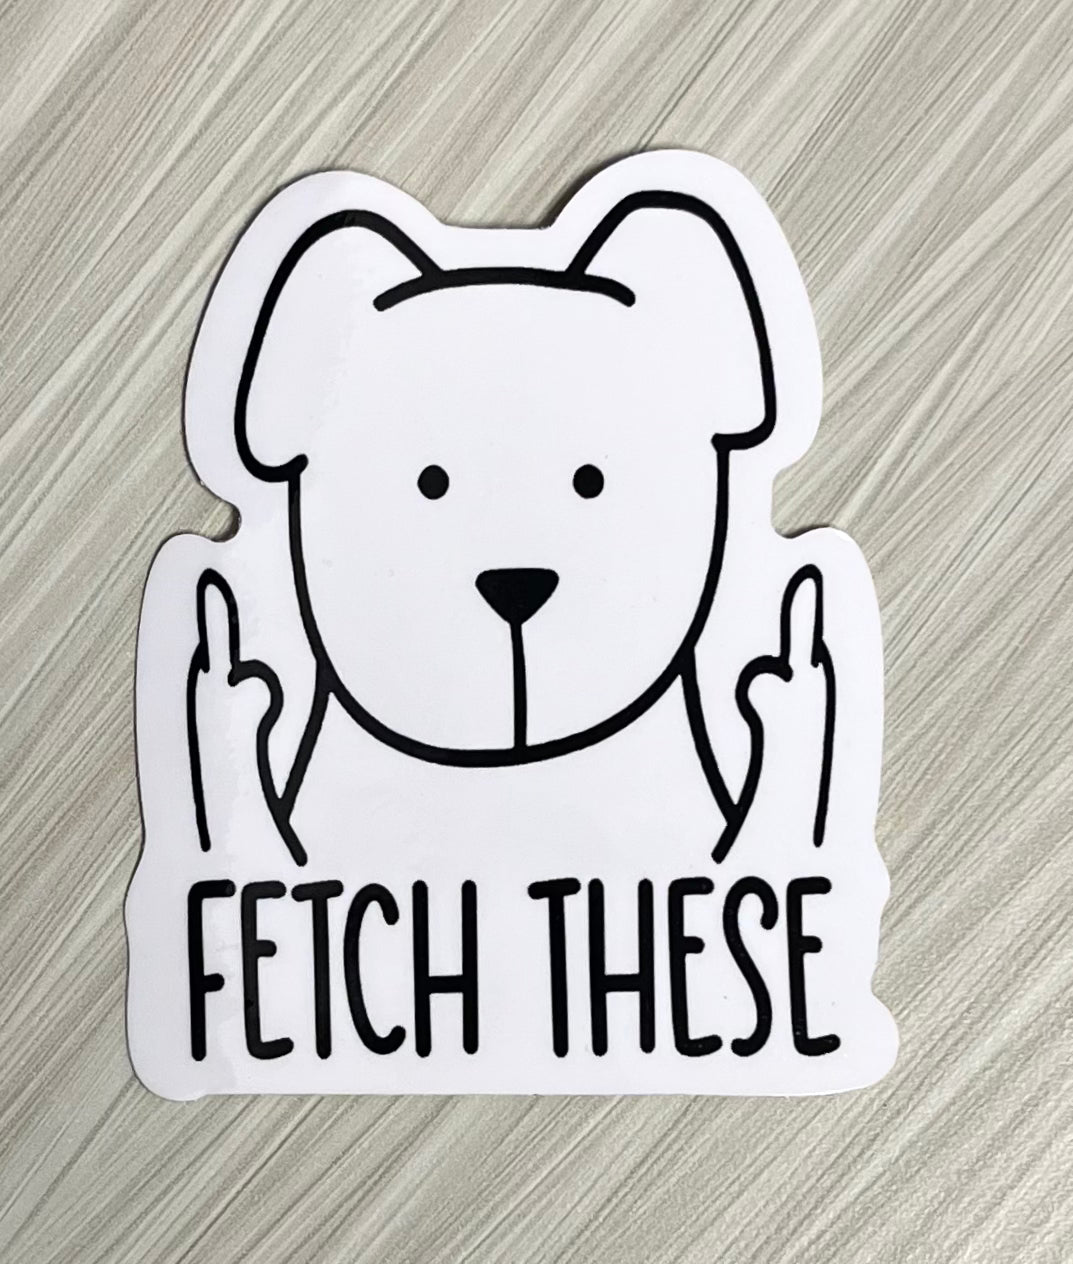 “FETCH THESE” STICKERS